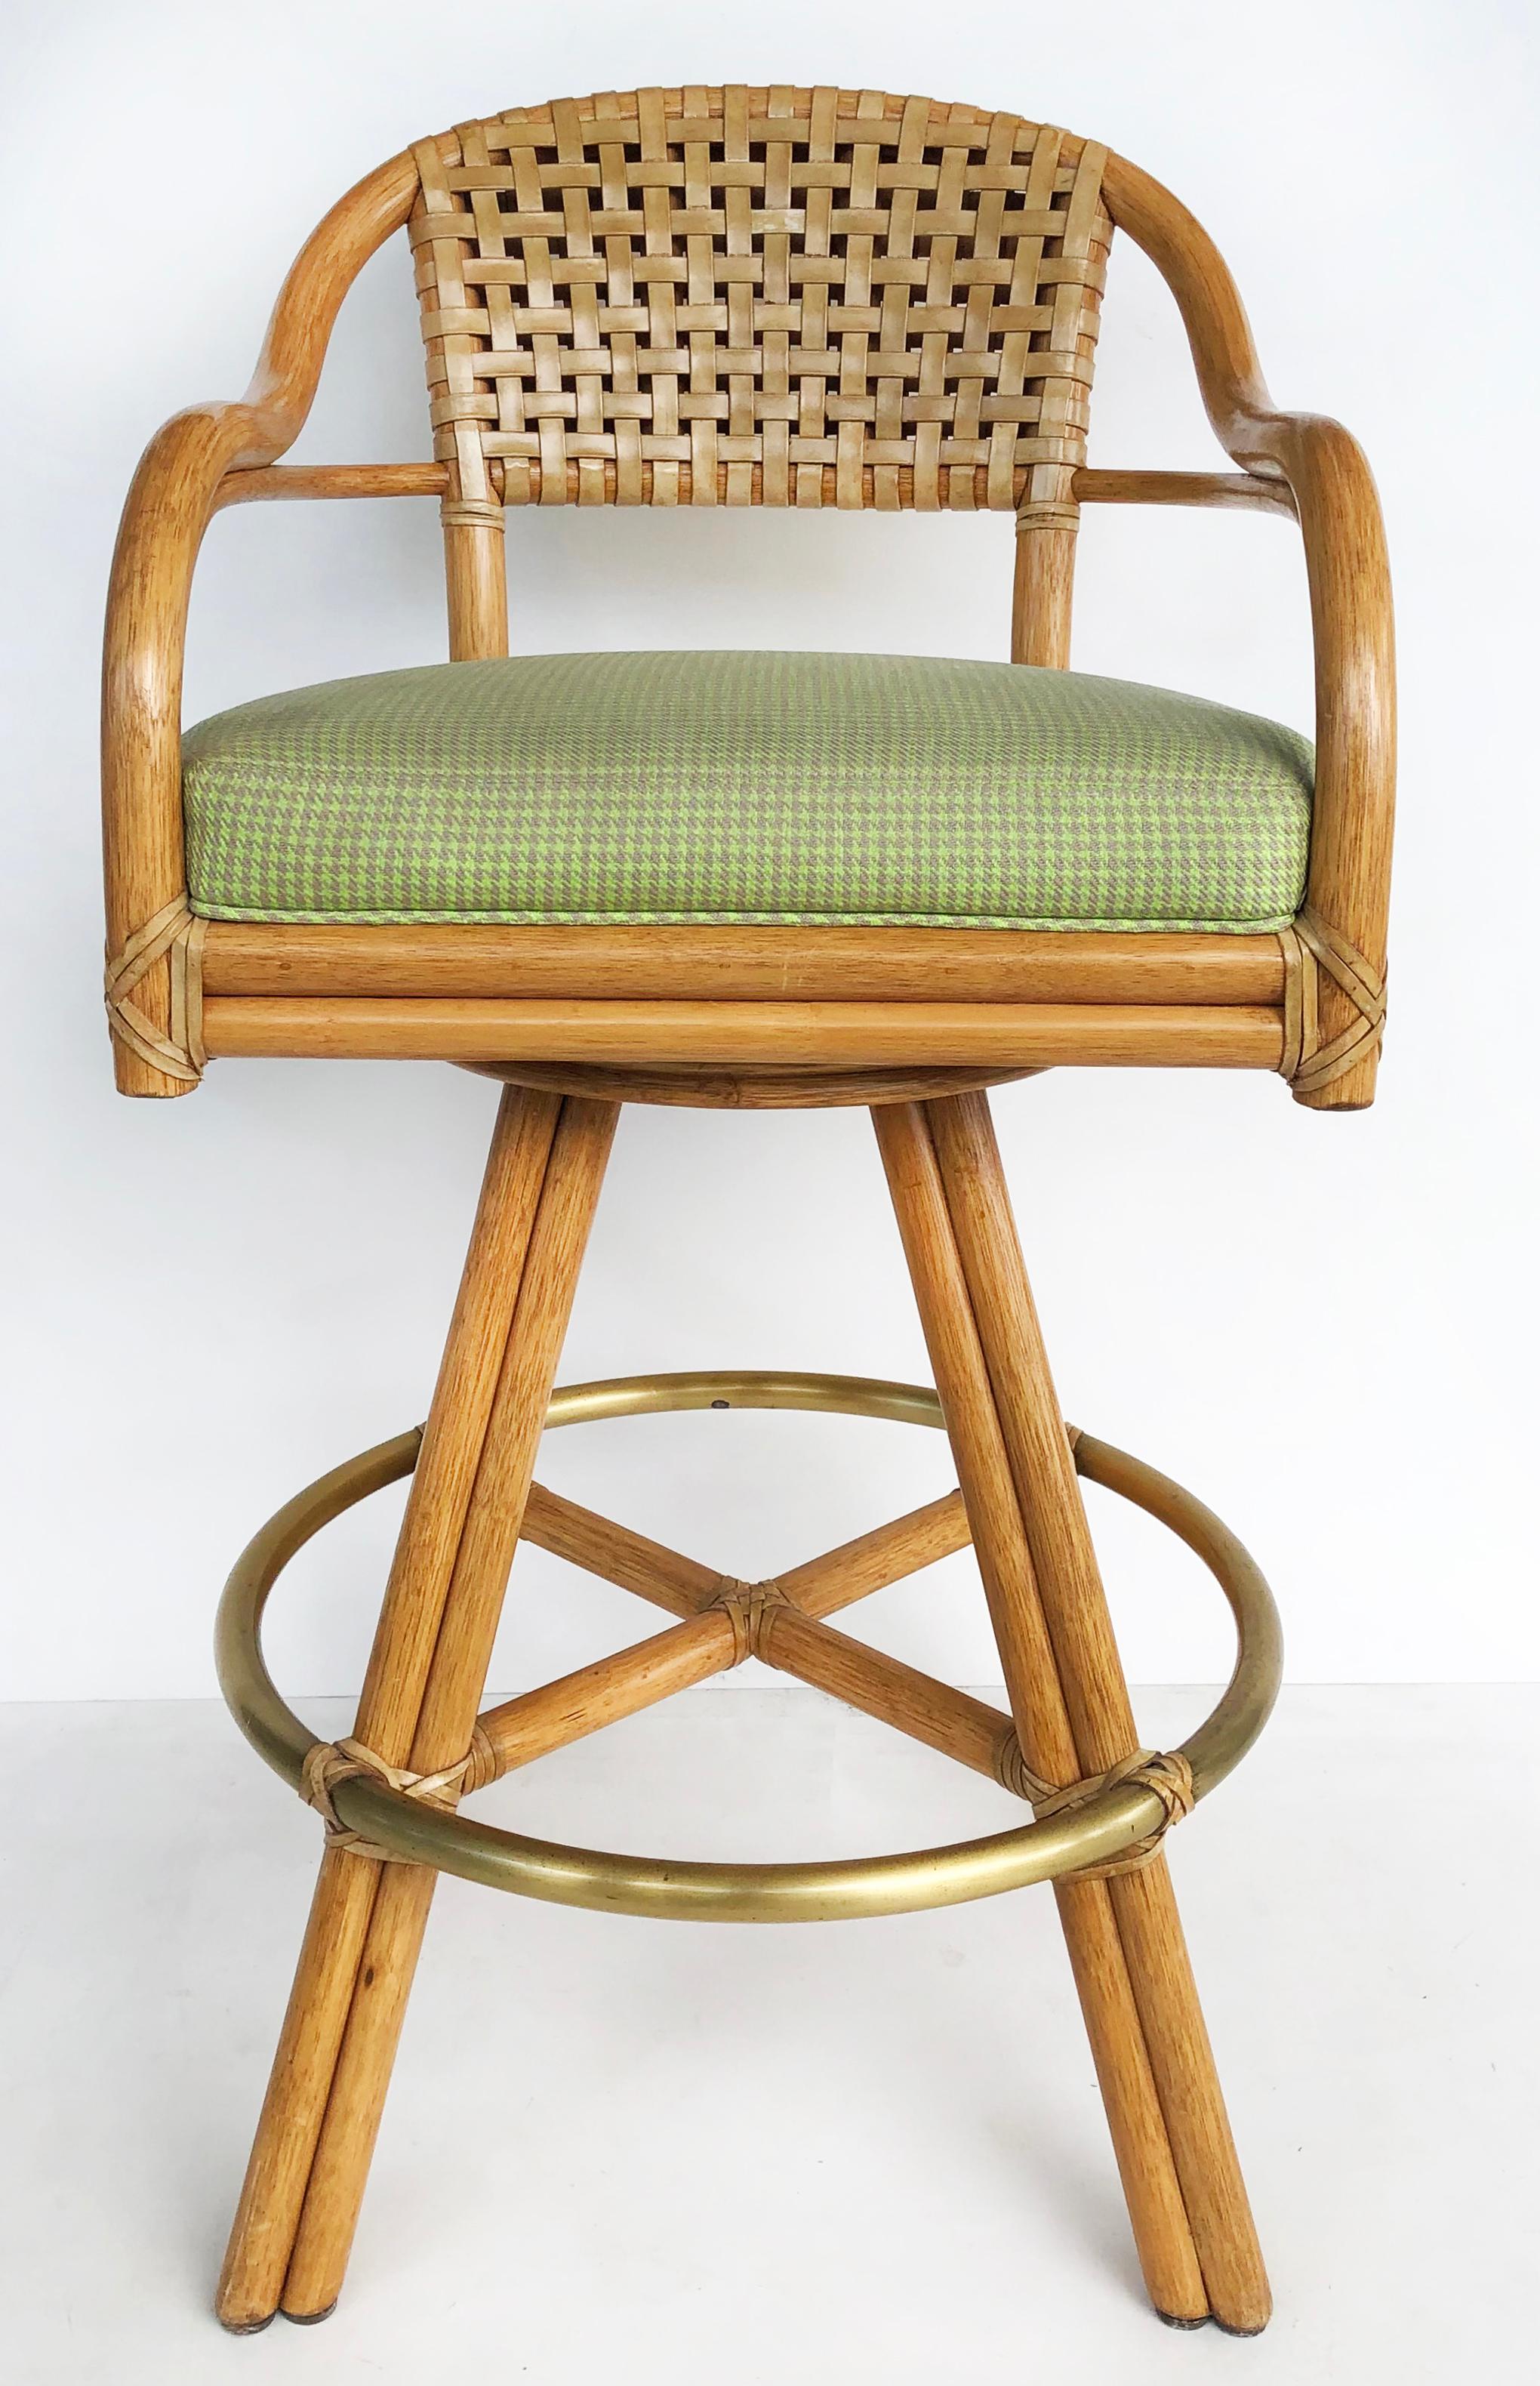 McGuire of San Francisco swivel bar stools in rattan, leather & brass, set of 3

Offered for sale is a set of three McGuire of San Francisco rattan swivel bar height stools. The backs are woven leather and the framed is wrapped in leather. The